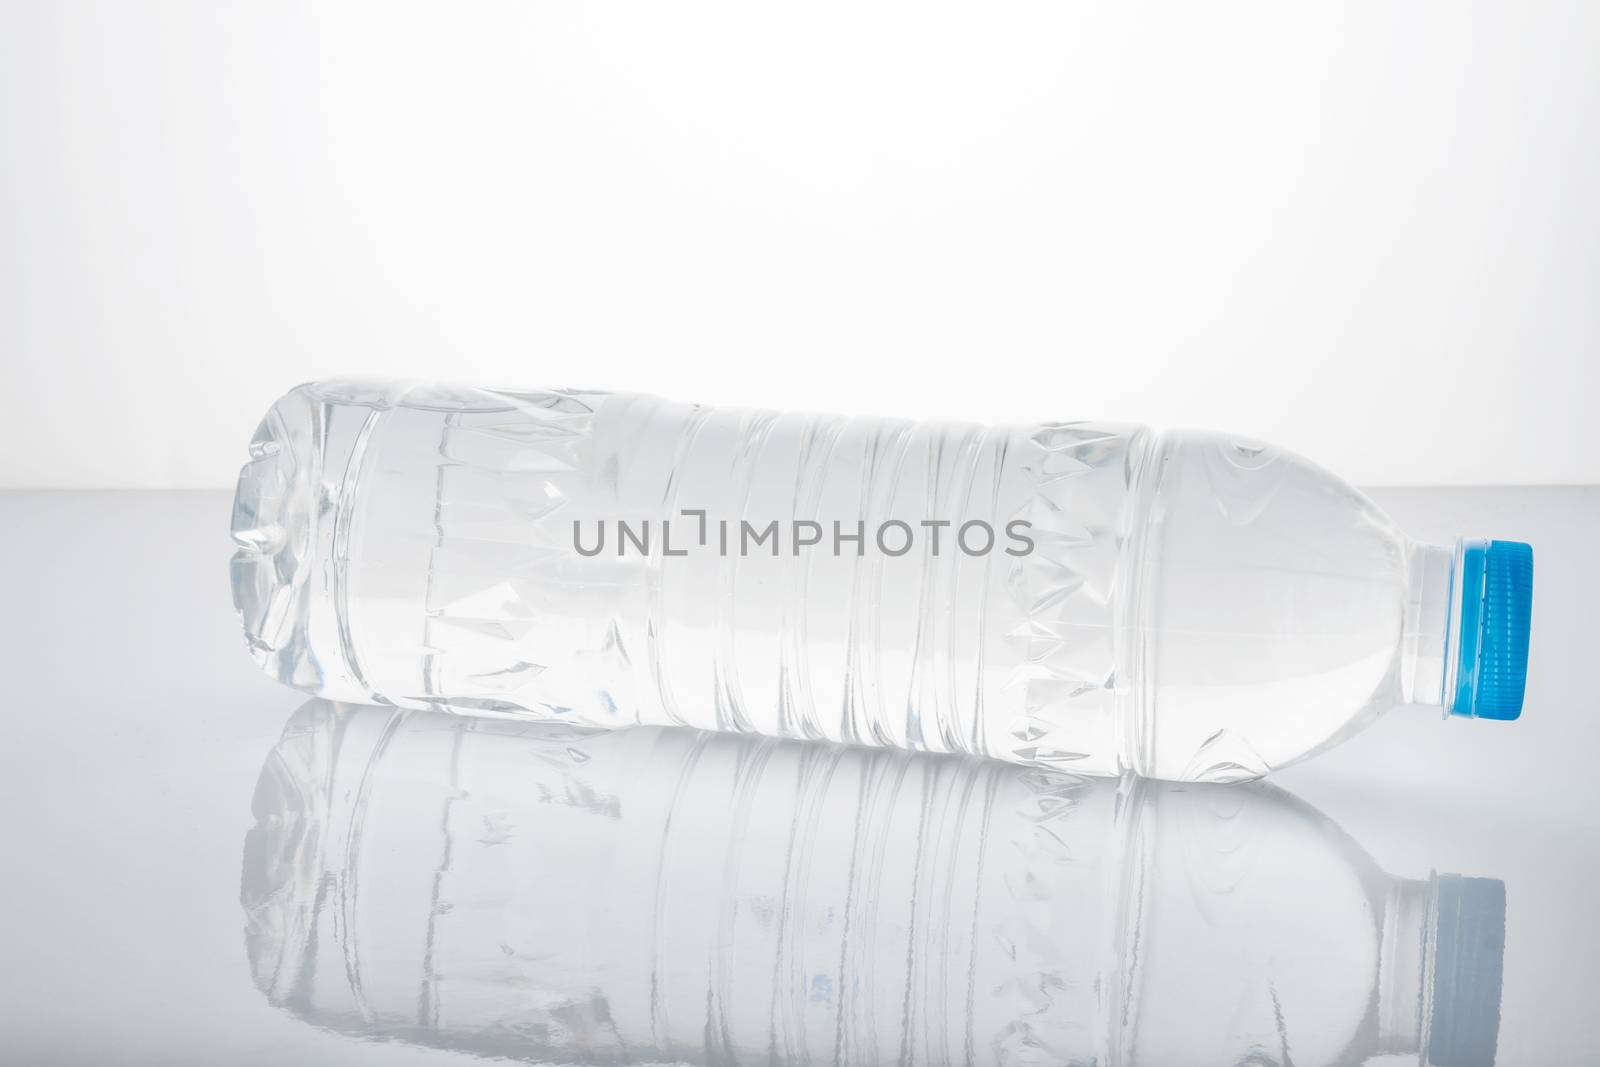  plastic water bottle  by ronnarong